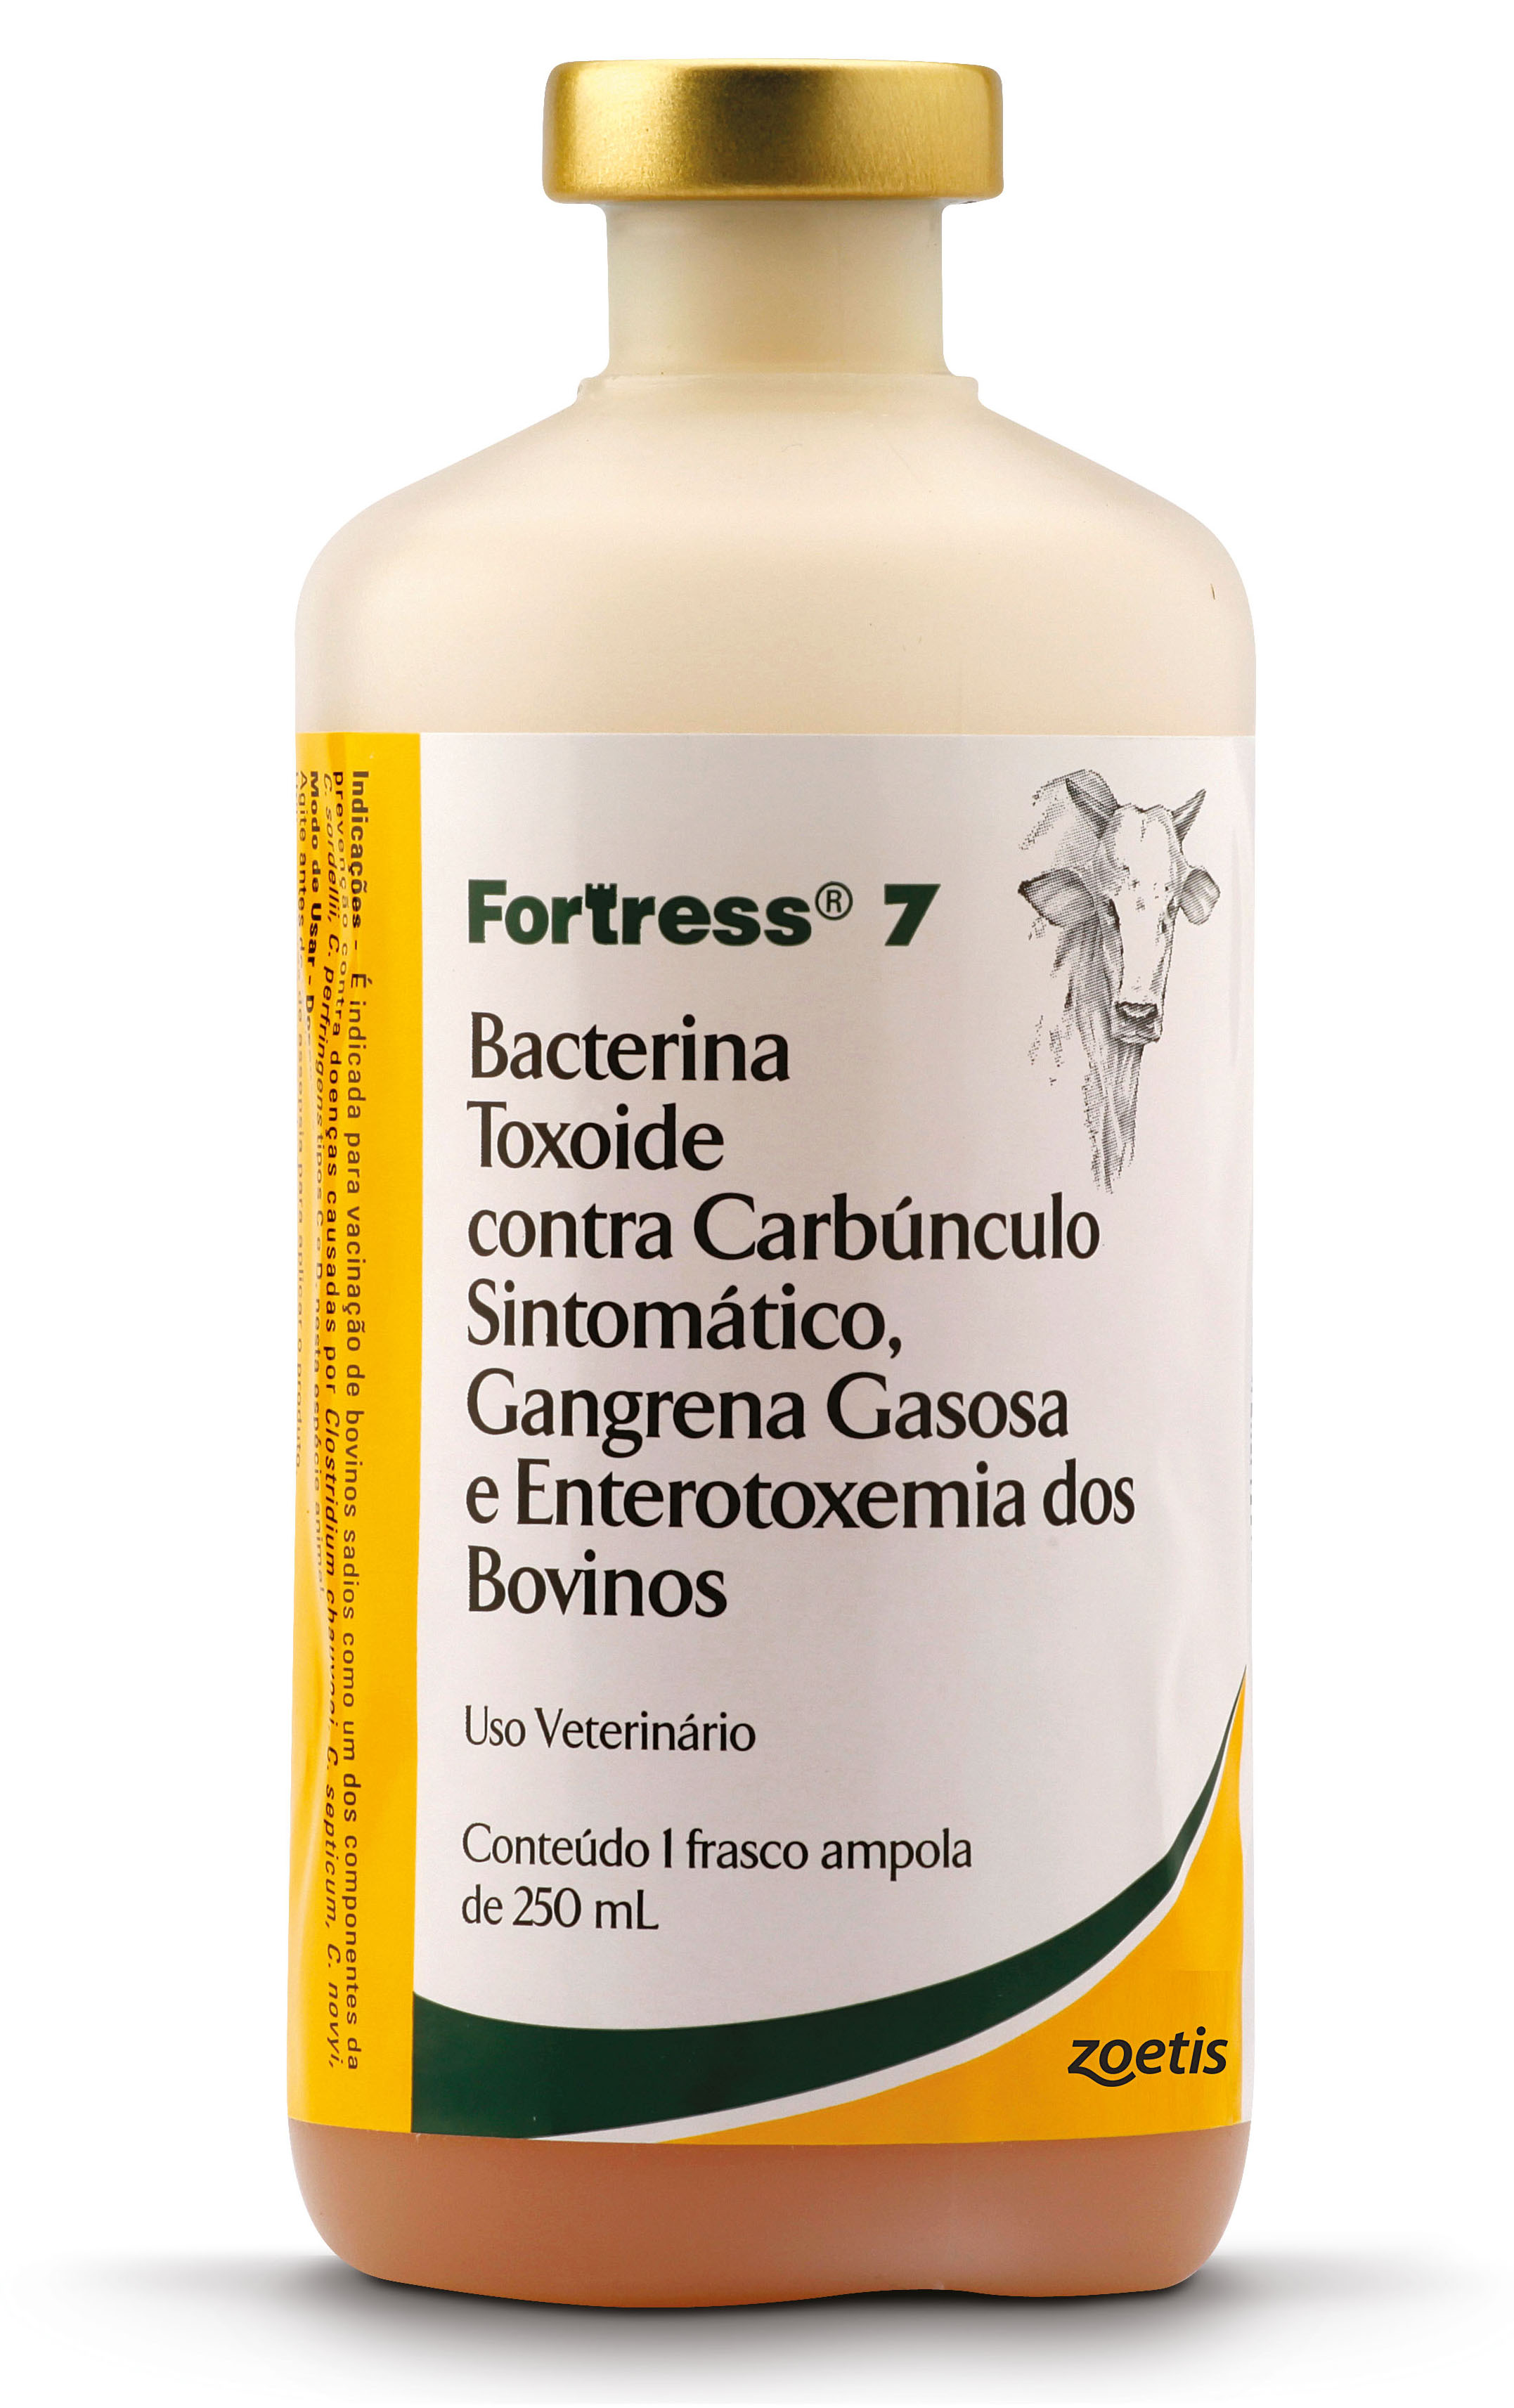 Fortress® 7